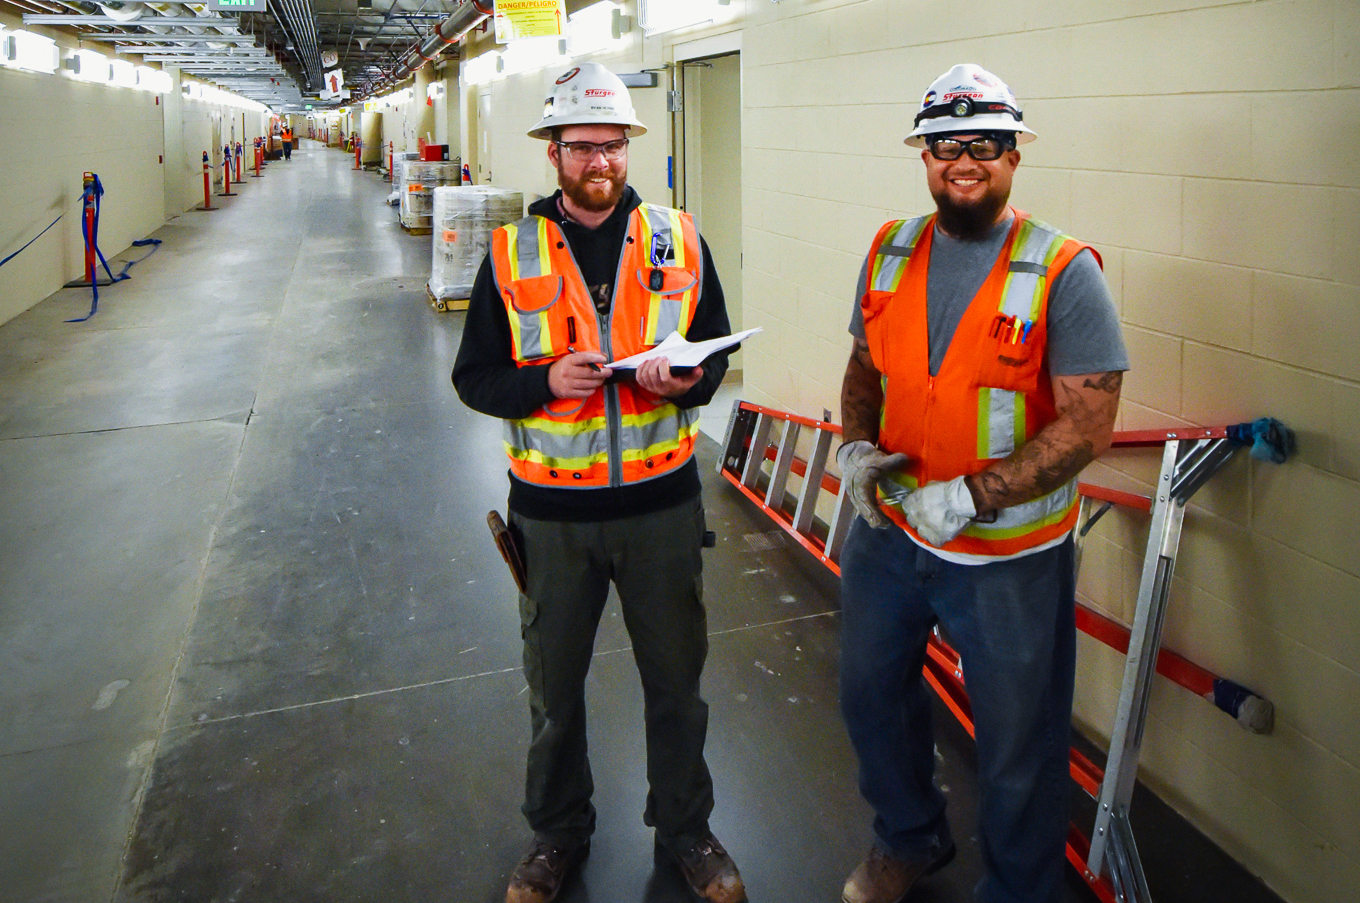 Two Sturgeon Electric workers smiling in a hallway